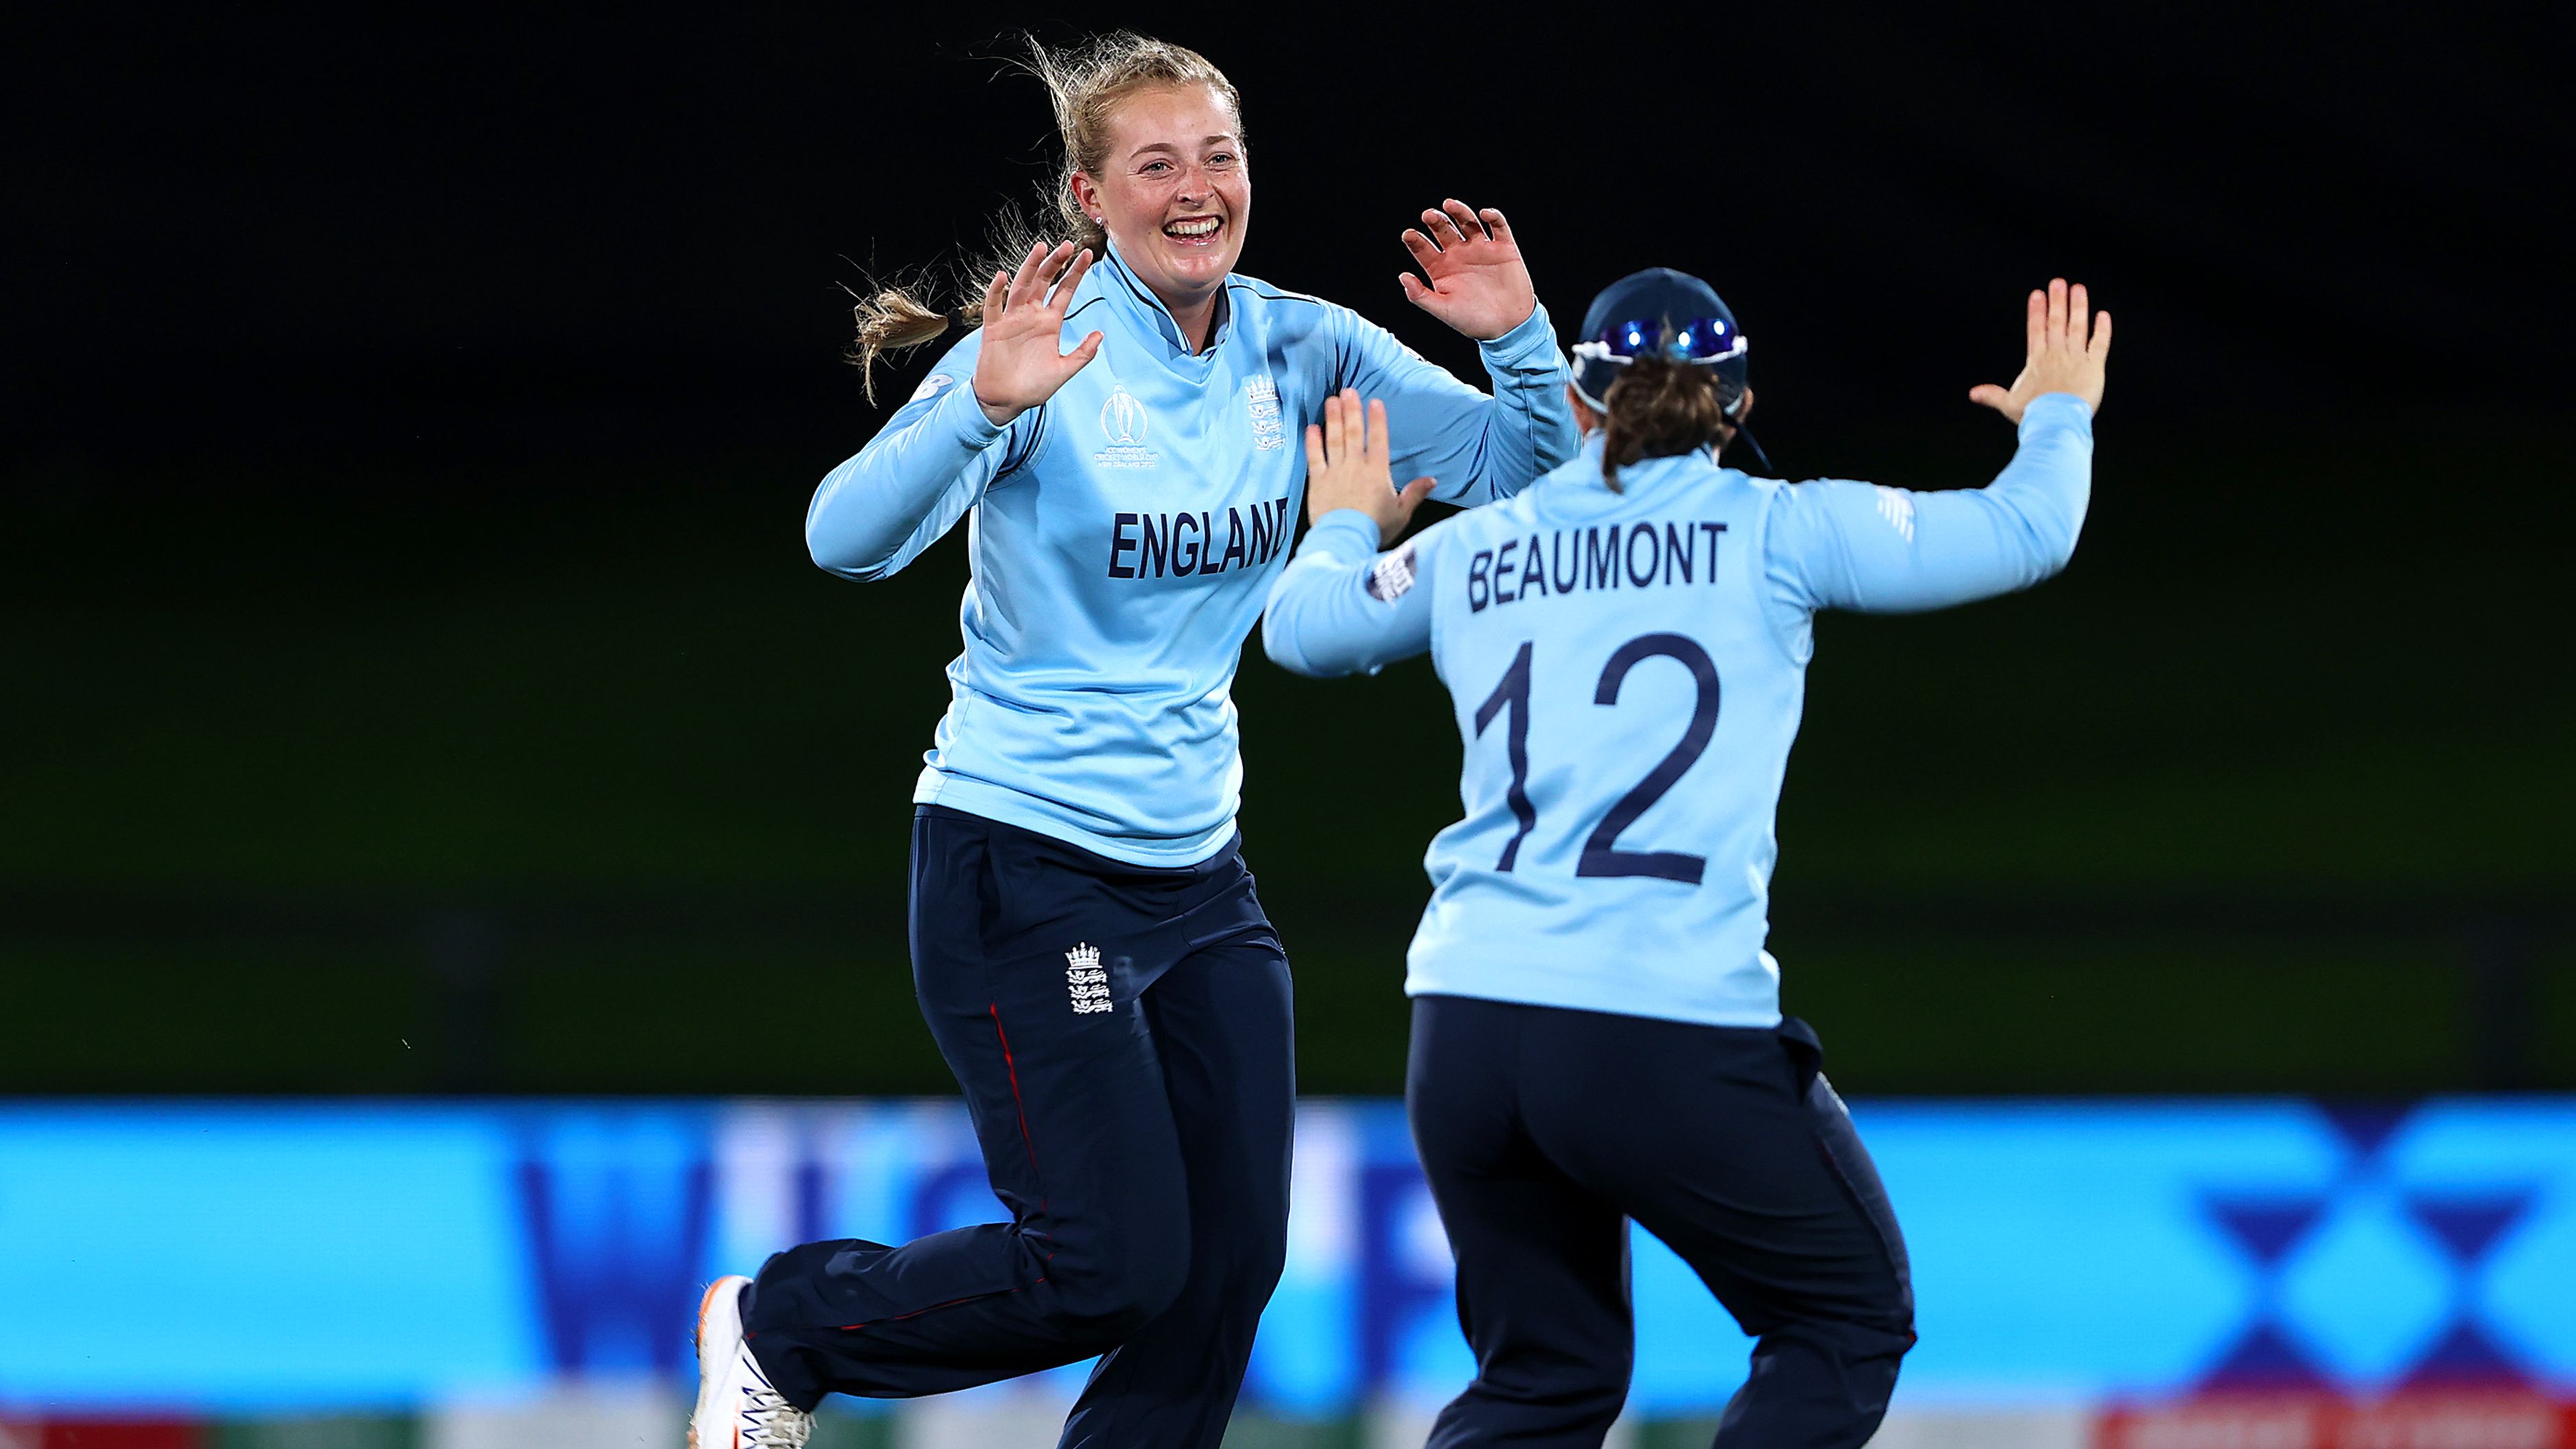 England joins Australia in Women's Cricket World Cup final after victory over South Africa